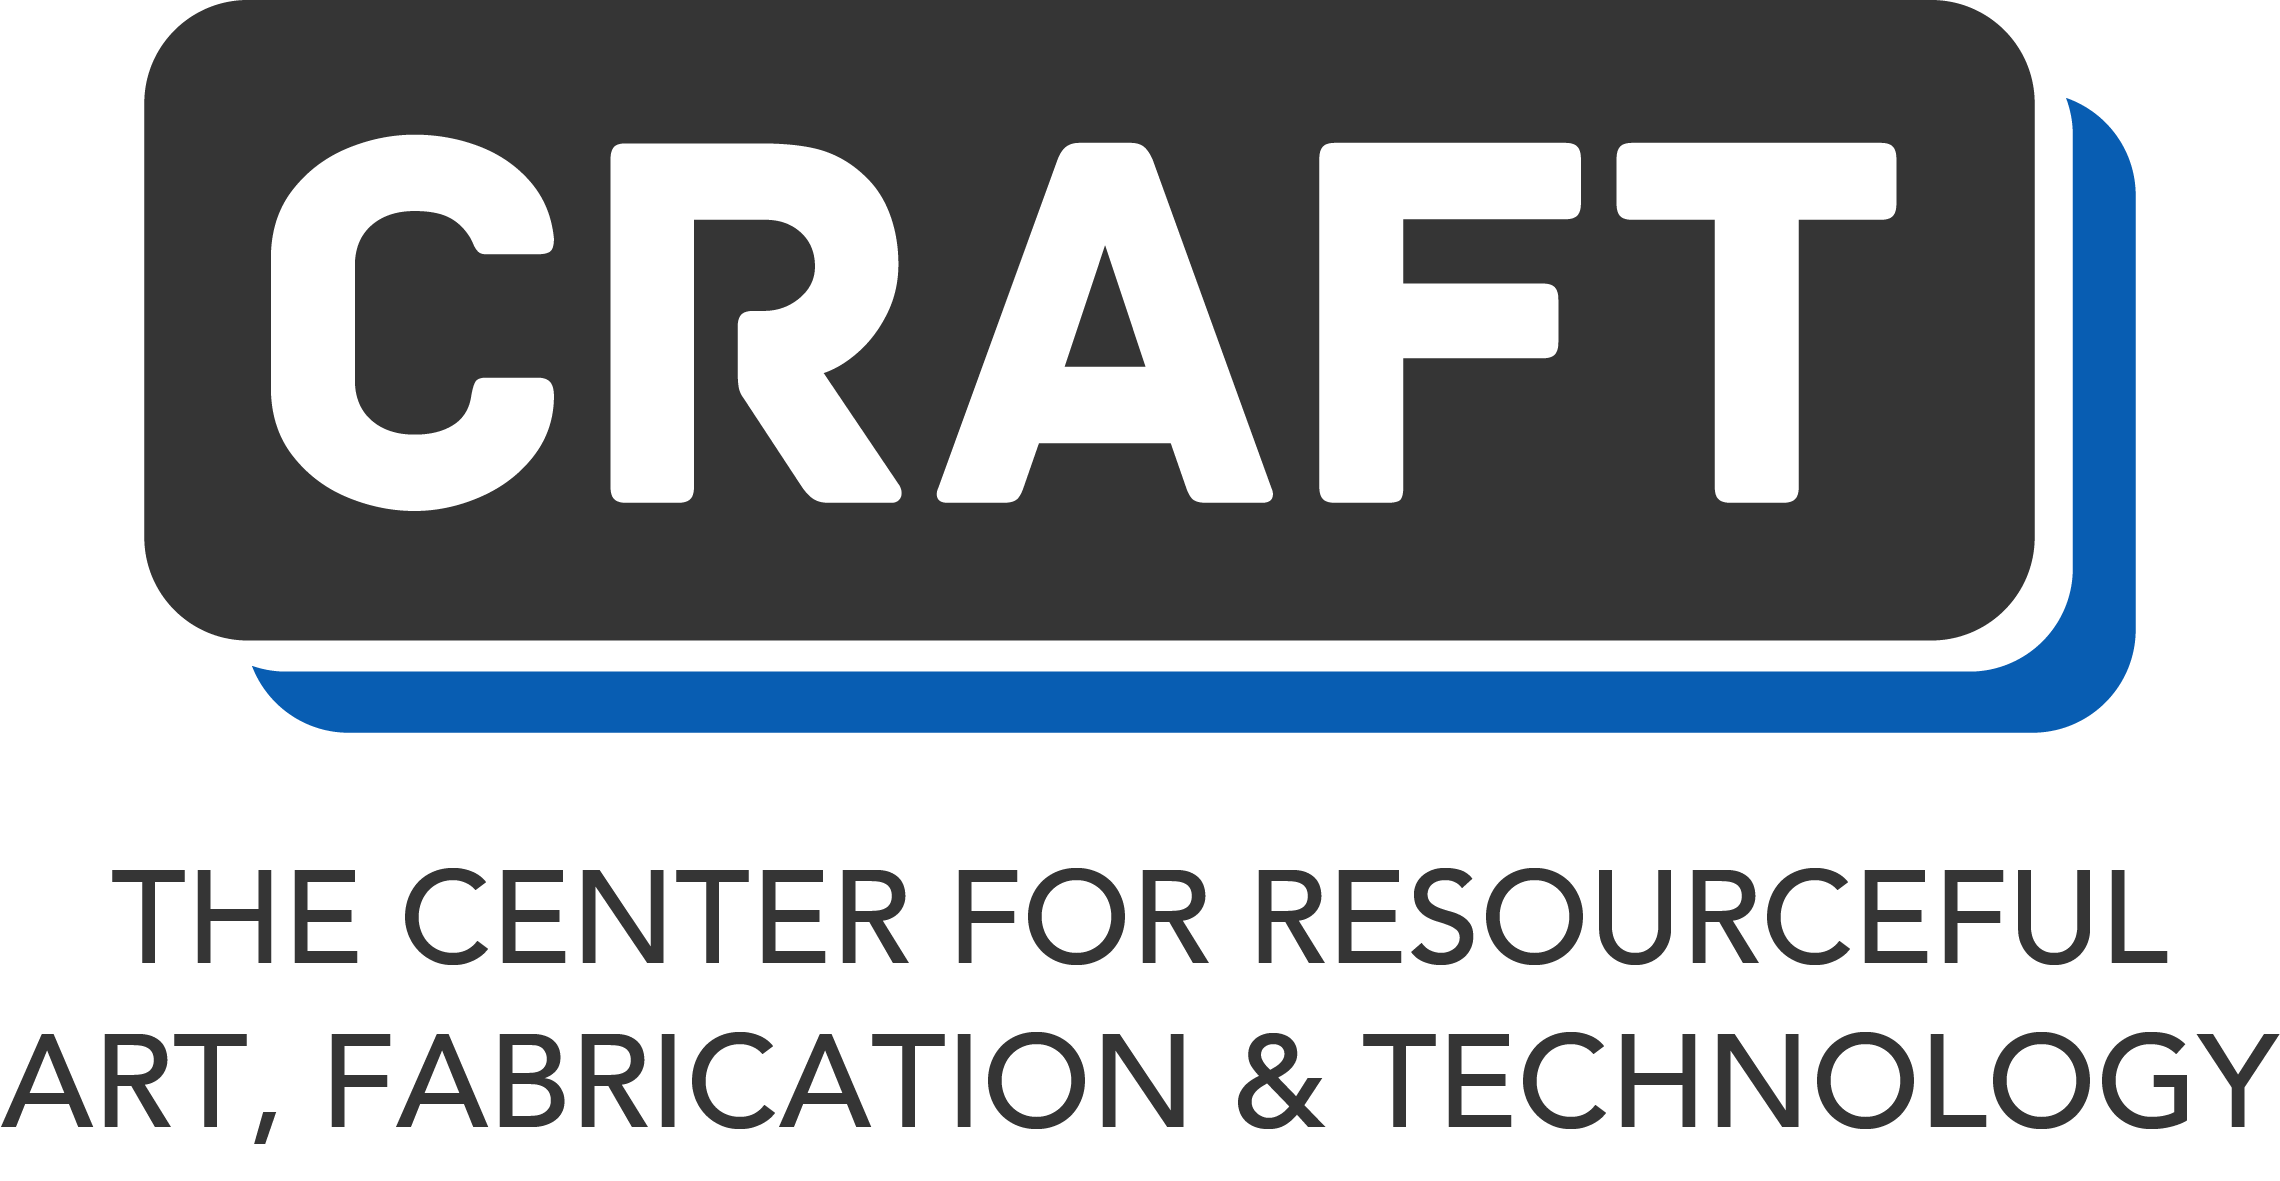 CRAFT - The Center for Resourceful Art, Fabrication & Technology